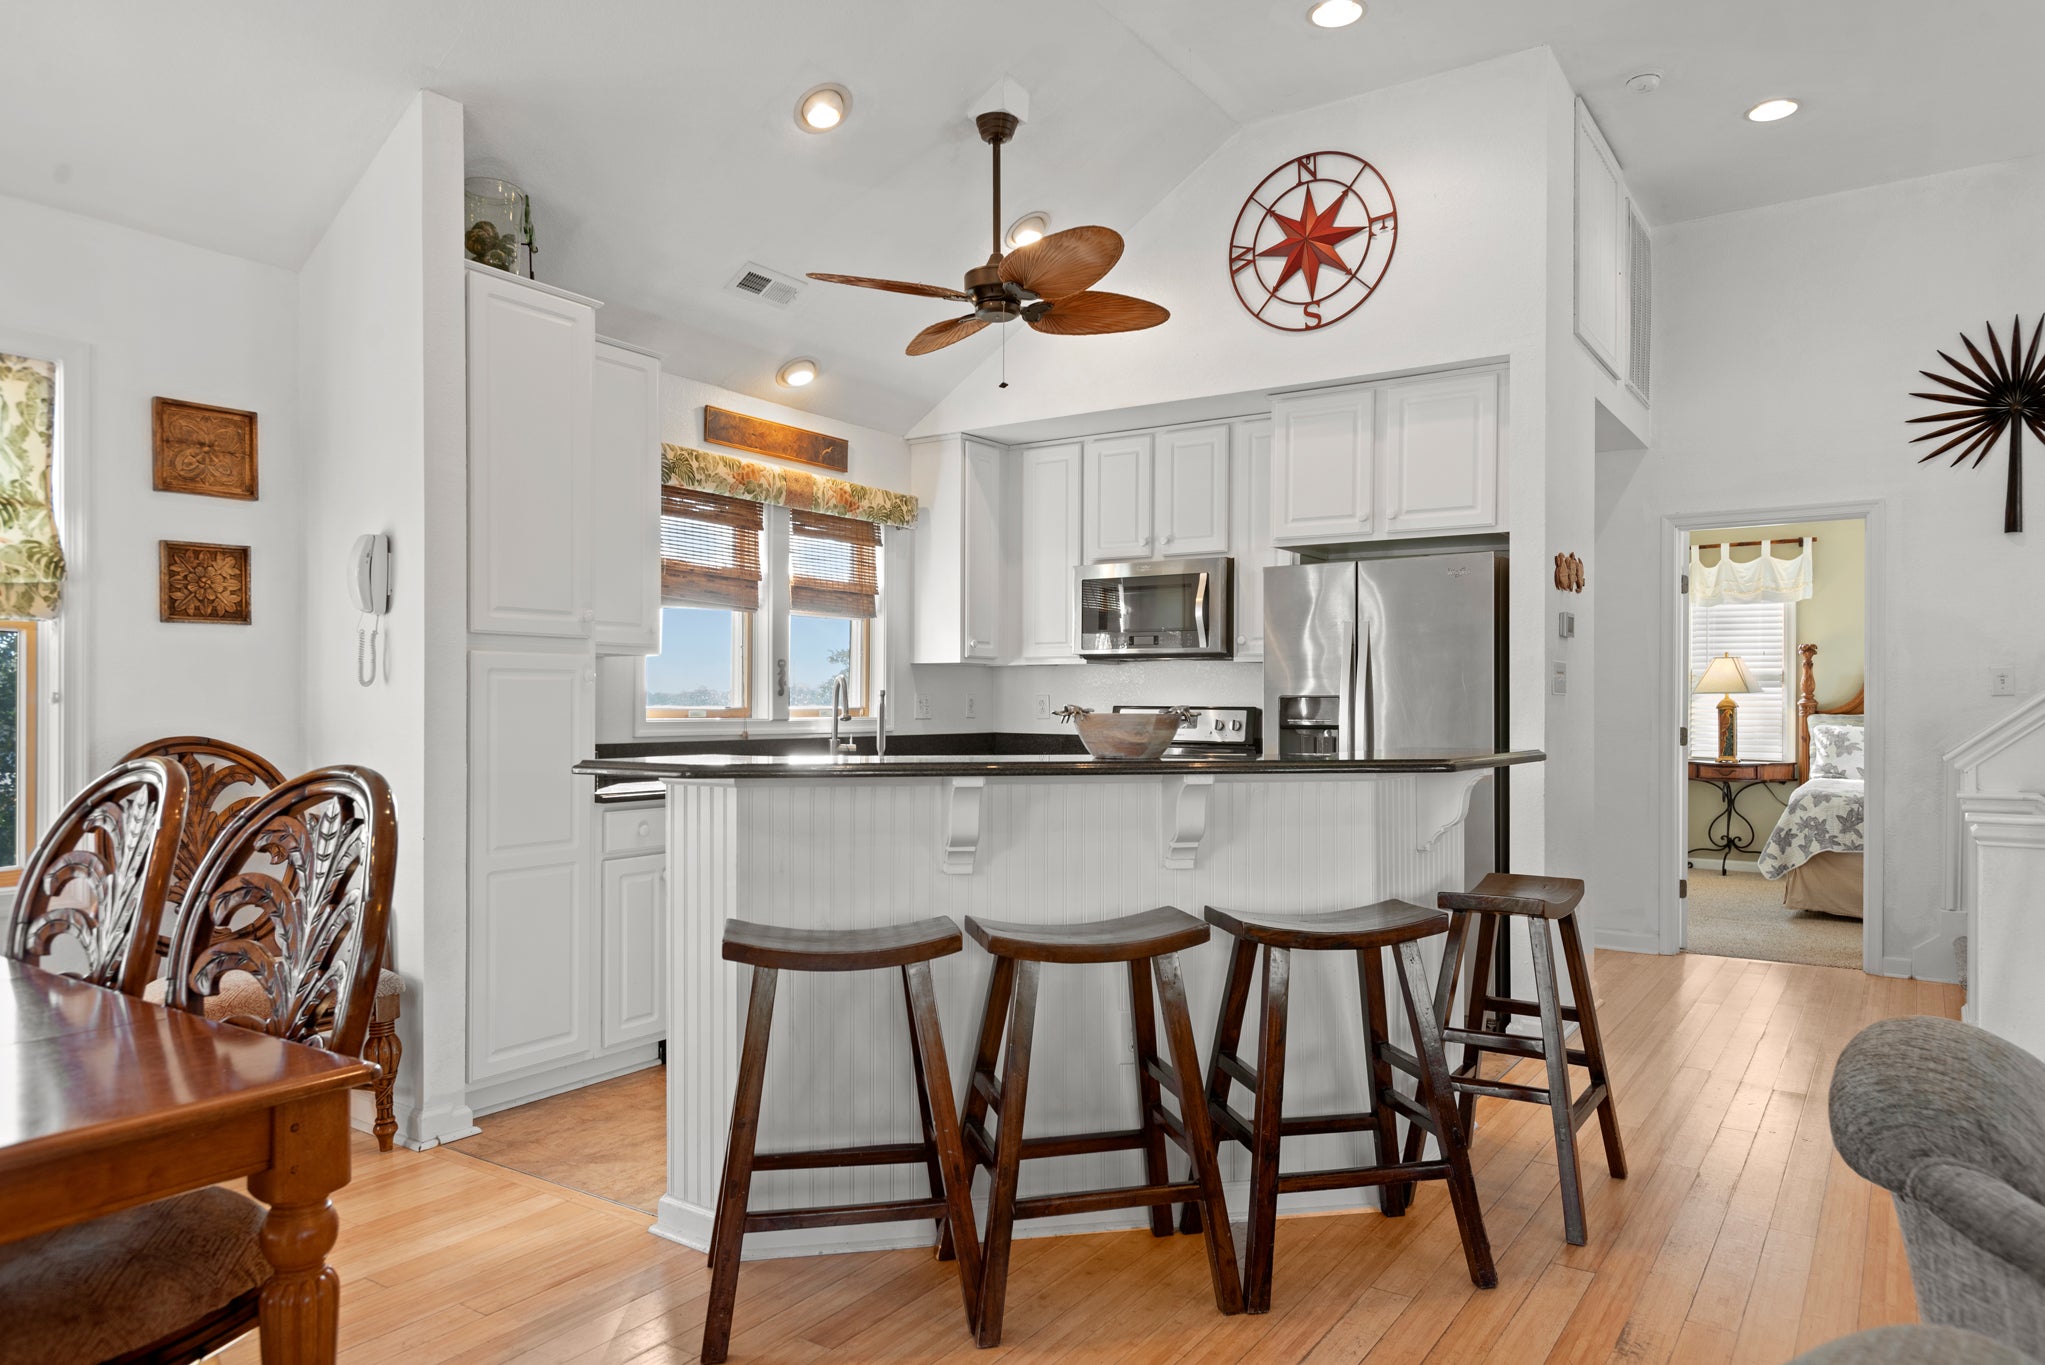 CL572: Endless Sunsets in Corolla Light l Top Level Kitchen Area